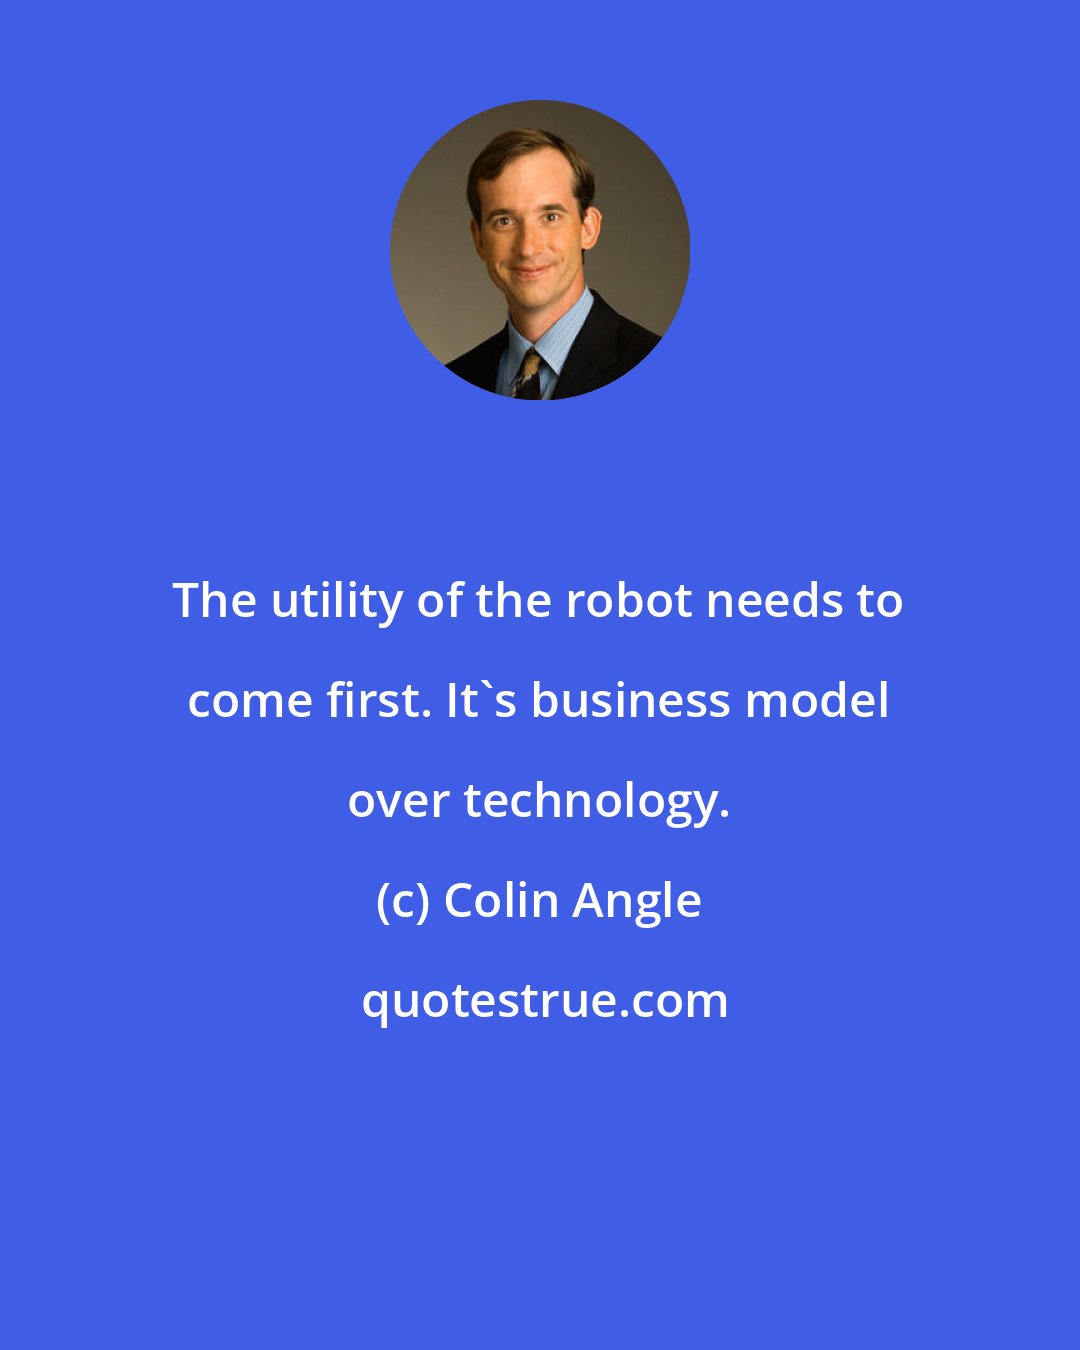 Colin Angle: The utility of the robot needs to come first. It's business model over technology.